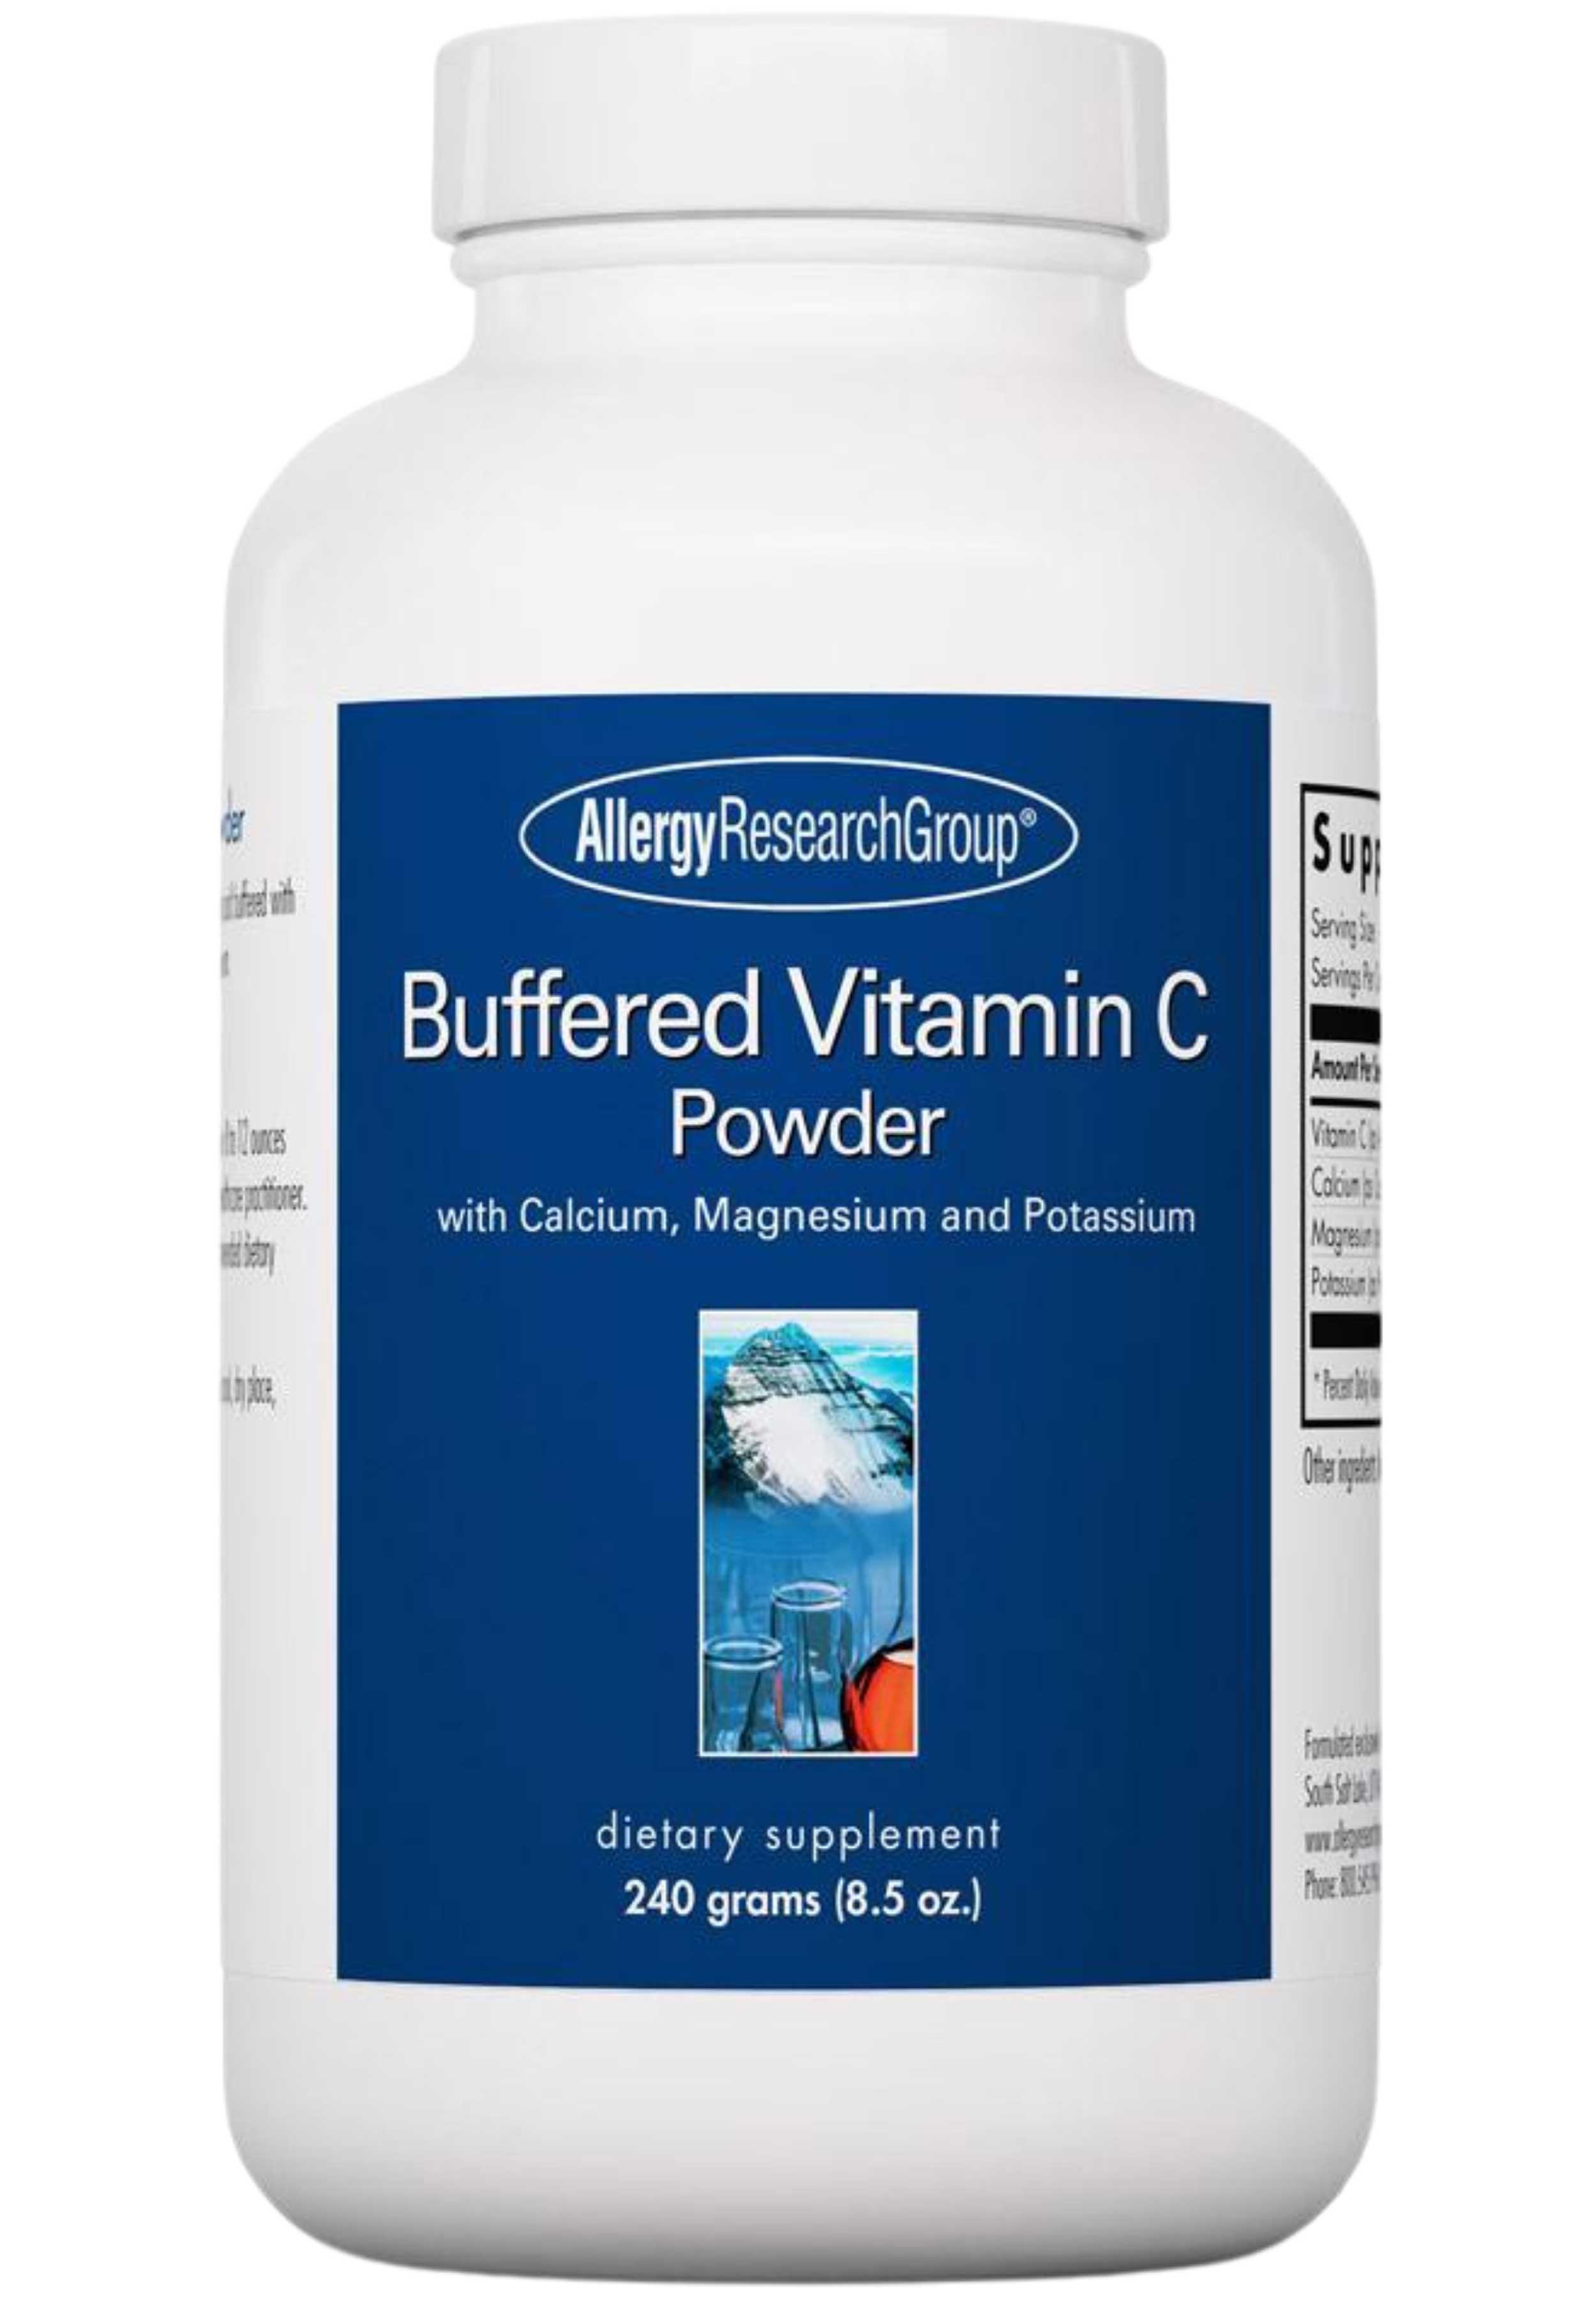 Allergy Research Group Buffered Vitamin C Powder